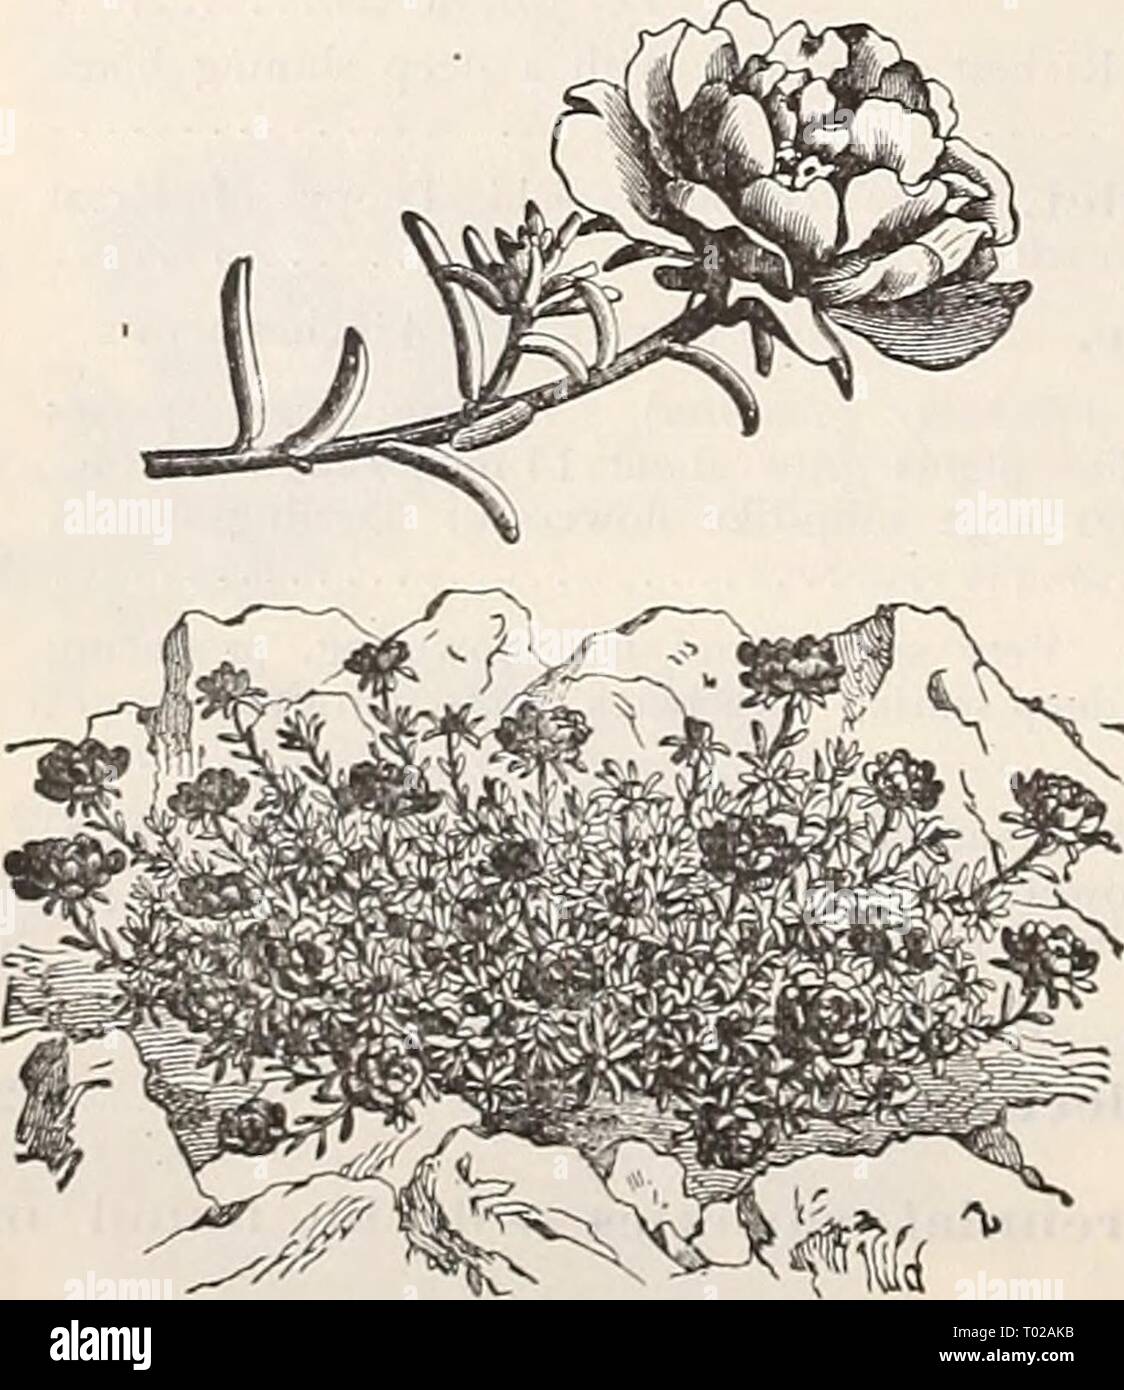 Dreer's garden calendar : 1900 . dreersgardencale1900henr Year: 1900  Orientale Hybrid Poppies.    Double Pdhtulaca. Platycodon, or '^Valilenbergia, (Cliinese Bell Flower.) Hardy perennials, produc- ing very showy flowers dur- ing the whole season. They form large clumps, and nre excellent for planting in ) er- manent borders or ani' rg shiubber'. per pkt. 3663 Grandifloruin. Mixed. Blue and white 5 3662 3Iariesi. Large. open, bell-shapeil flowers of a rich violei blue, beautiful, plant dwarf and com)-'act. 5- 3661 Japoiiicus Fl. PI. {Double Japan- ese Bell Plm'er) This new variety is of stro Stock Photo